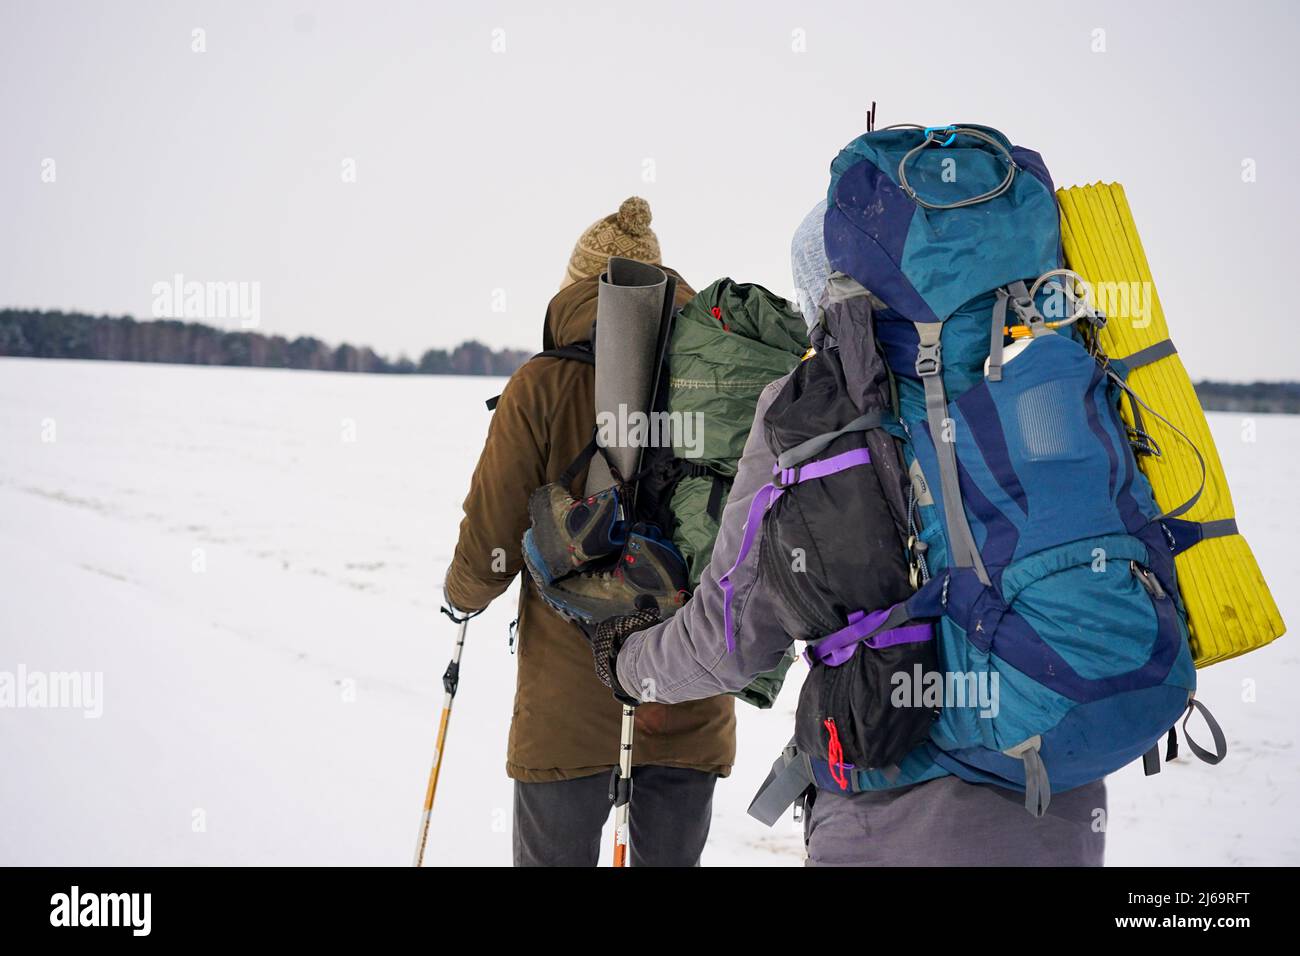 Two guys walk through loose snow during a winter expedition. They carry large backpacks, warm jackets. They hold trekking sticks in their hands. Stock Photo